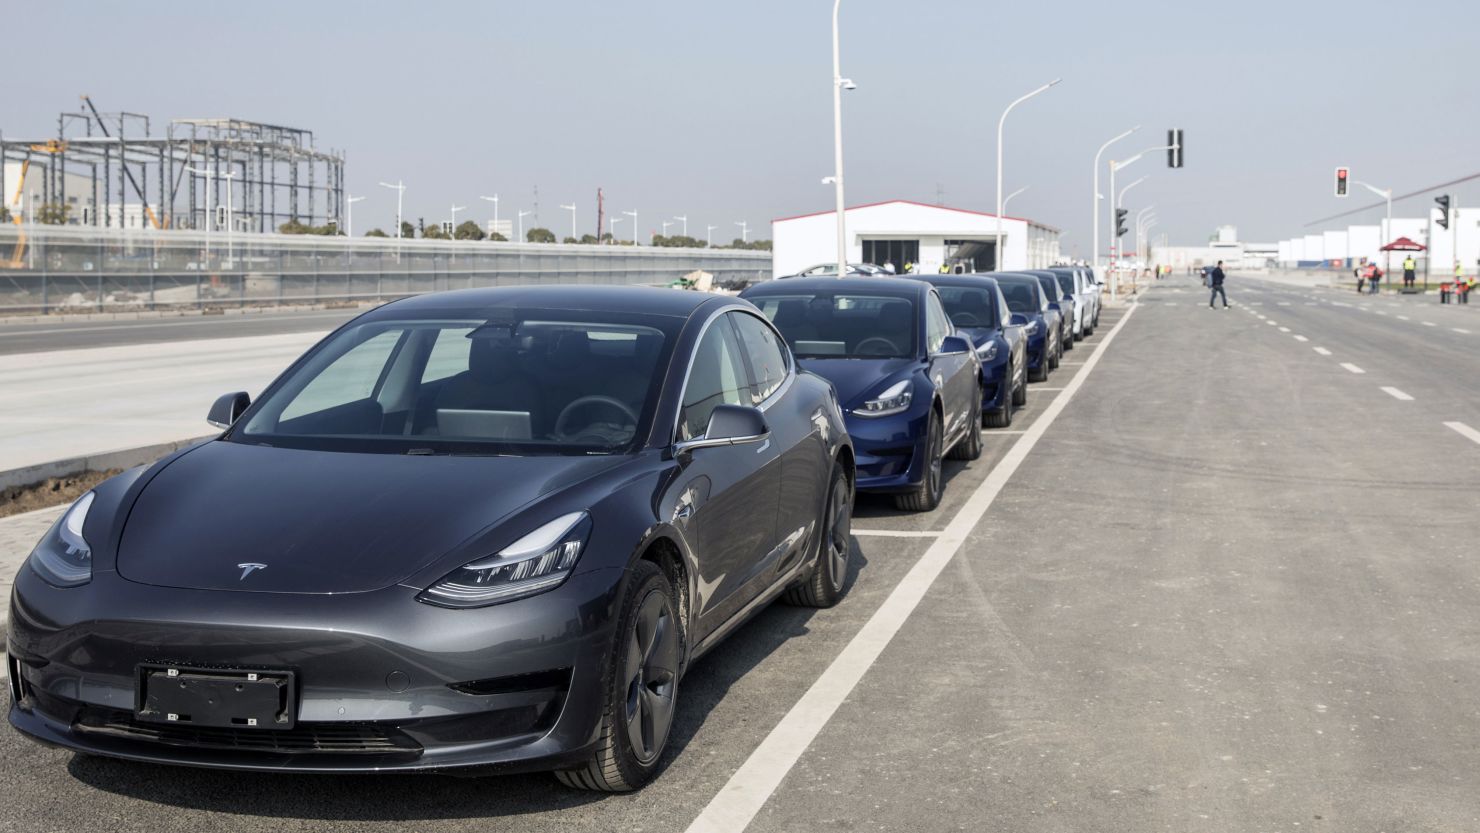 Tesla Model 3 vehicles sit parked at the company's Gigafactory in Shanghai, China, on December 30, 2019.